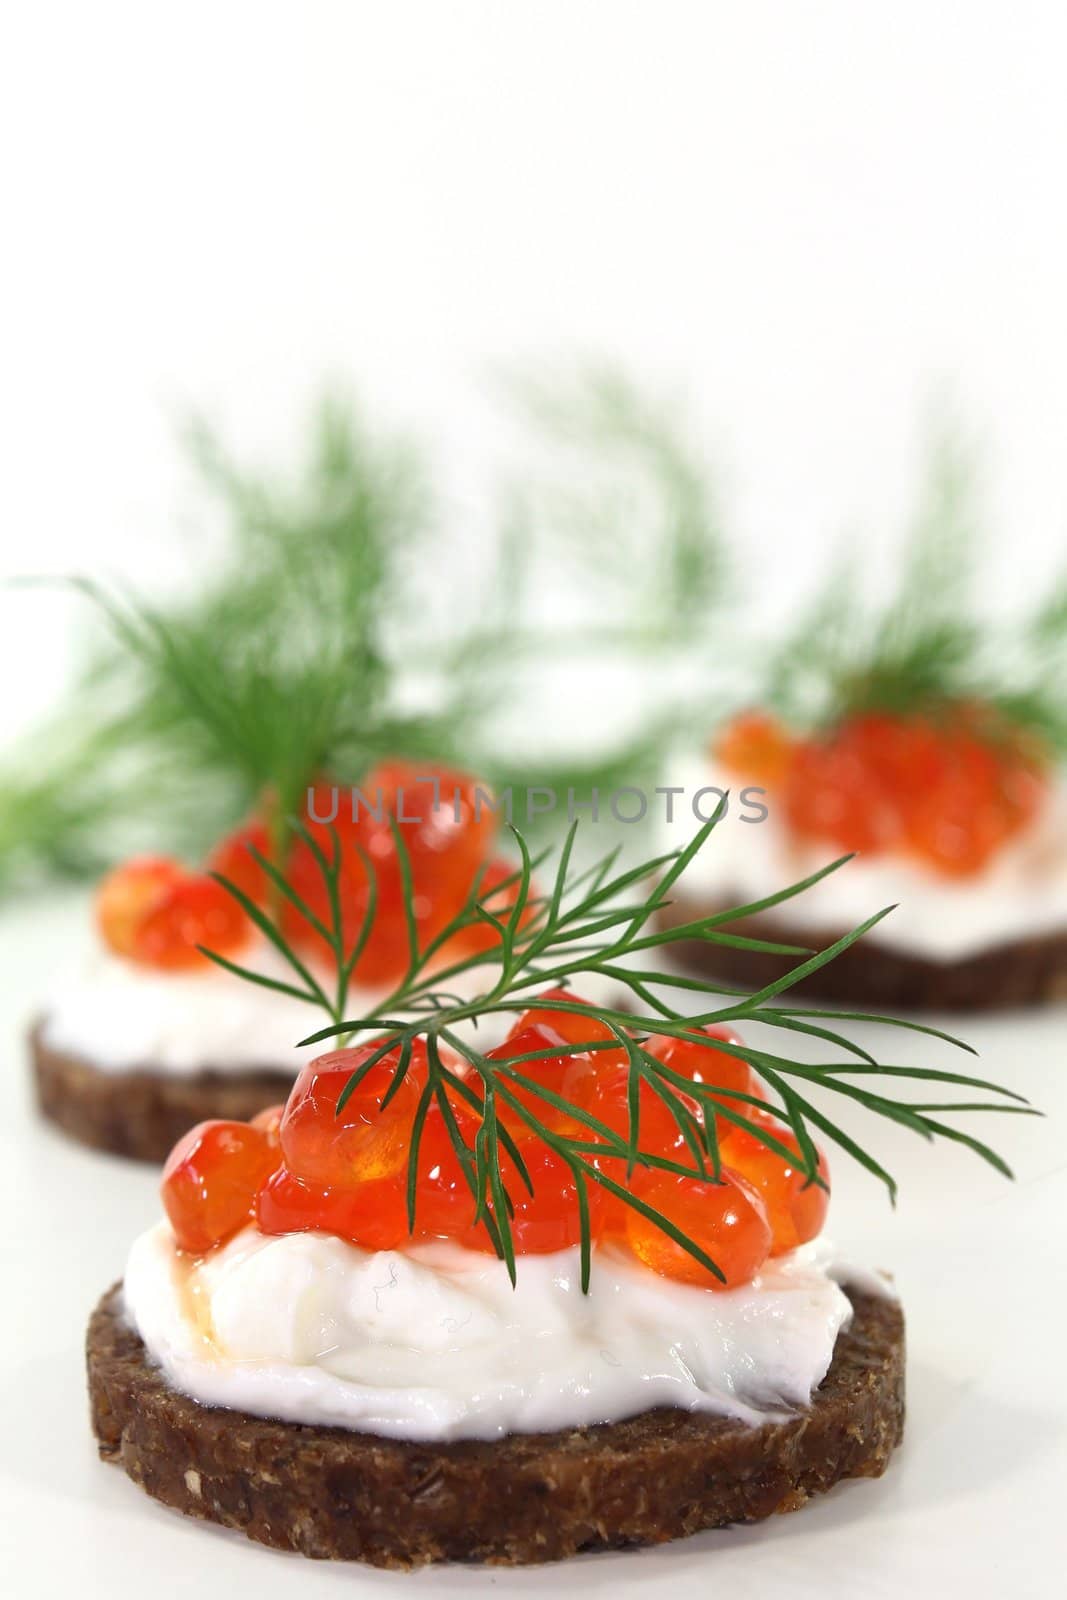 Pumpernickel with dill and caviar on a white background